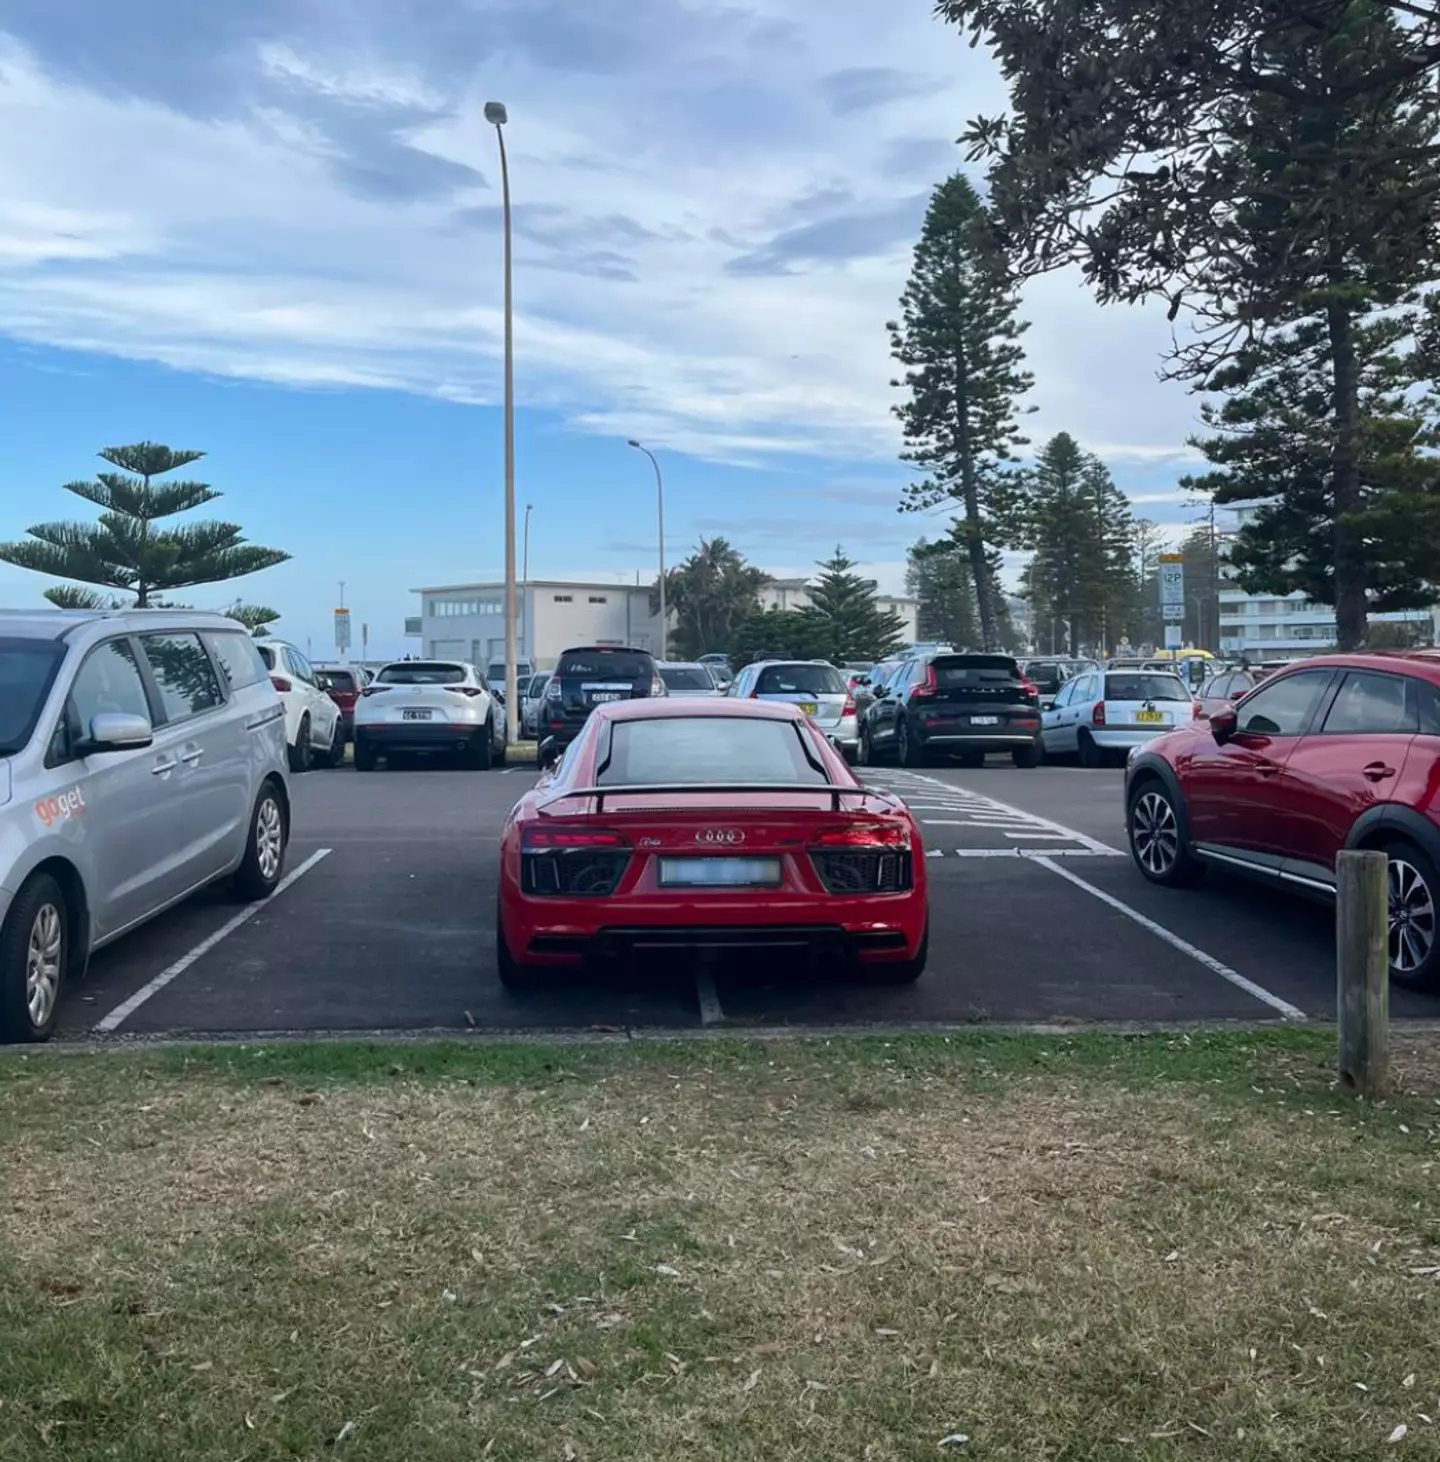 The Audi driver was shamed online for their parking choice.